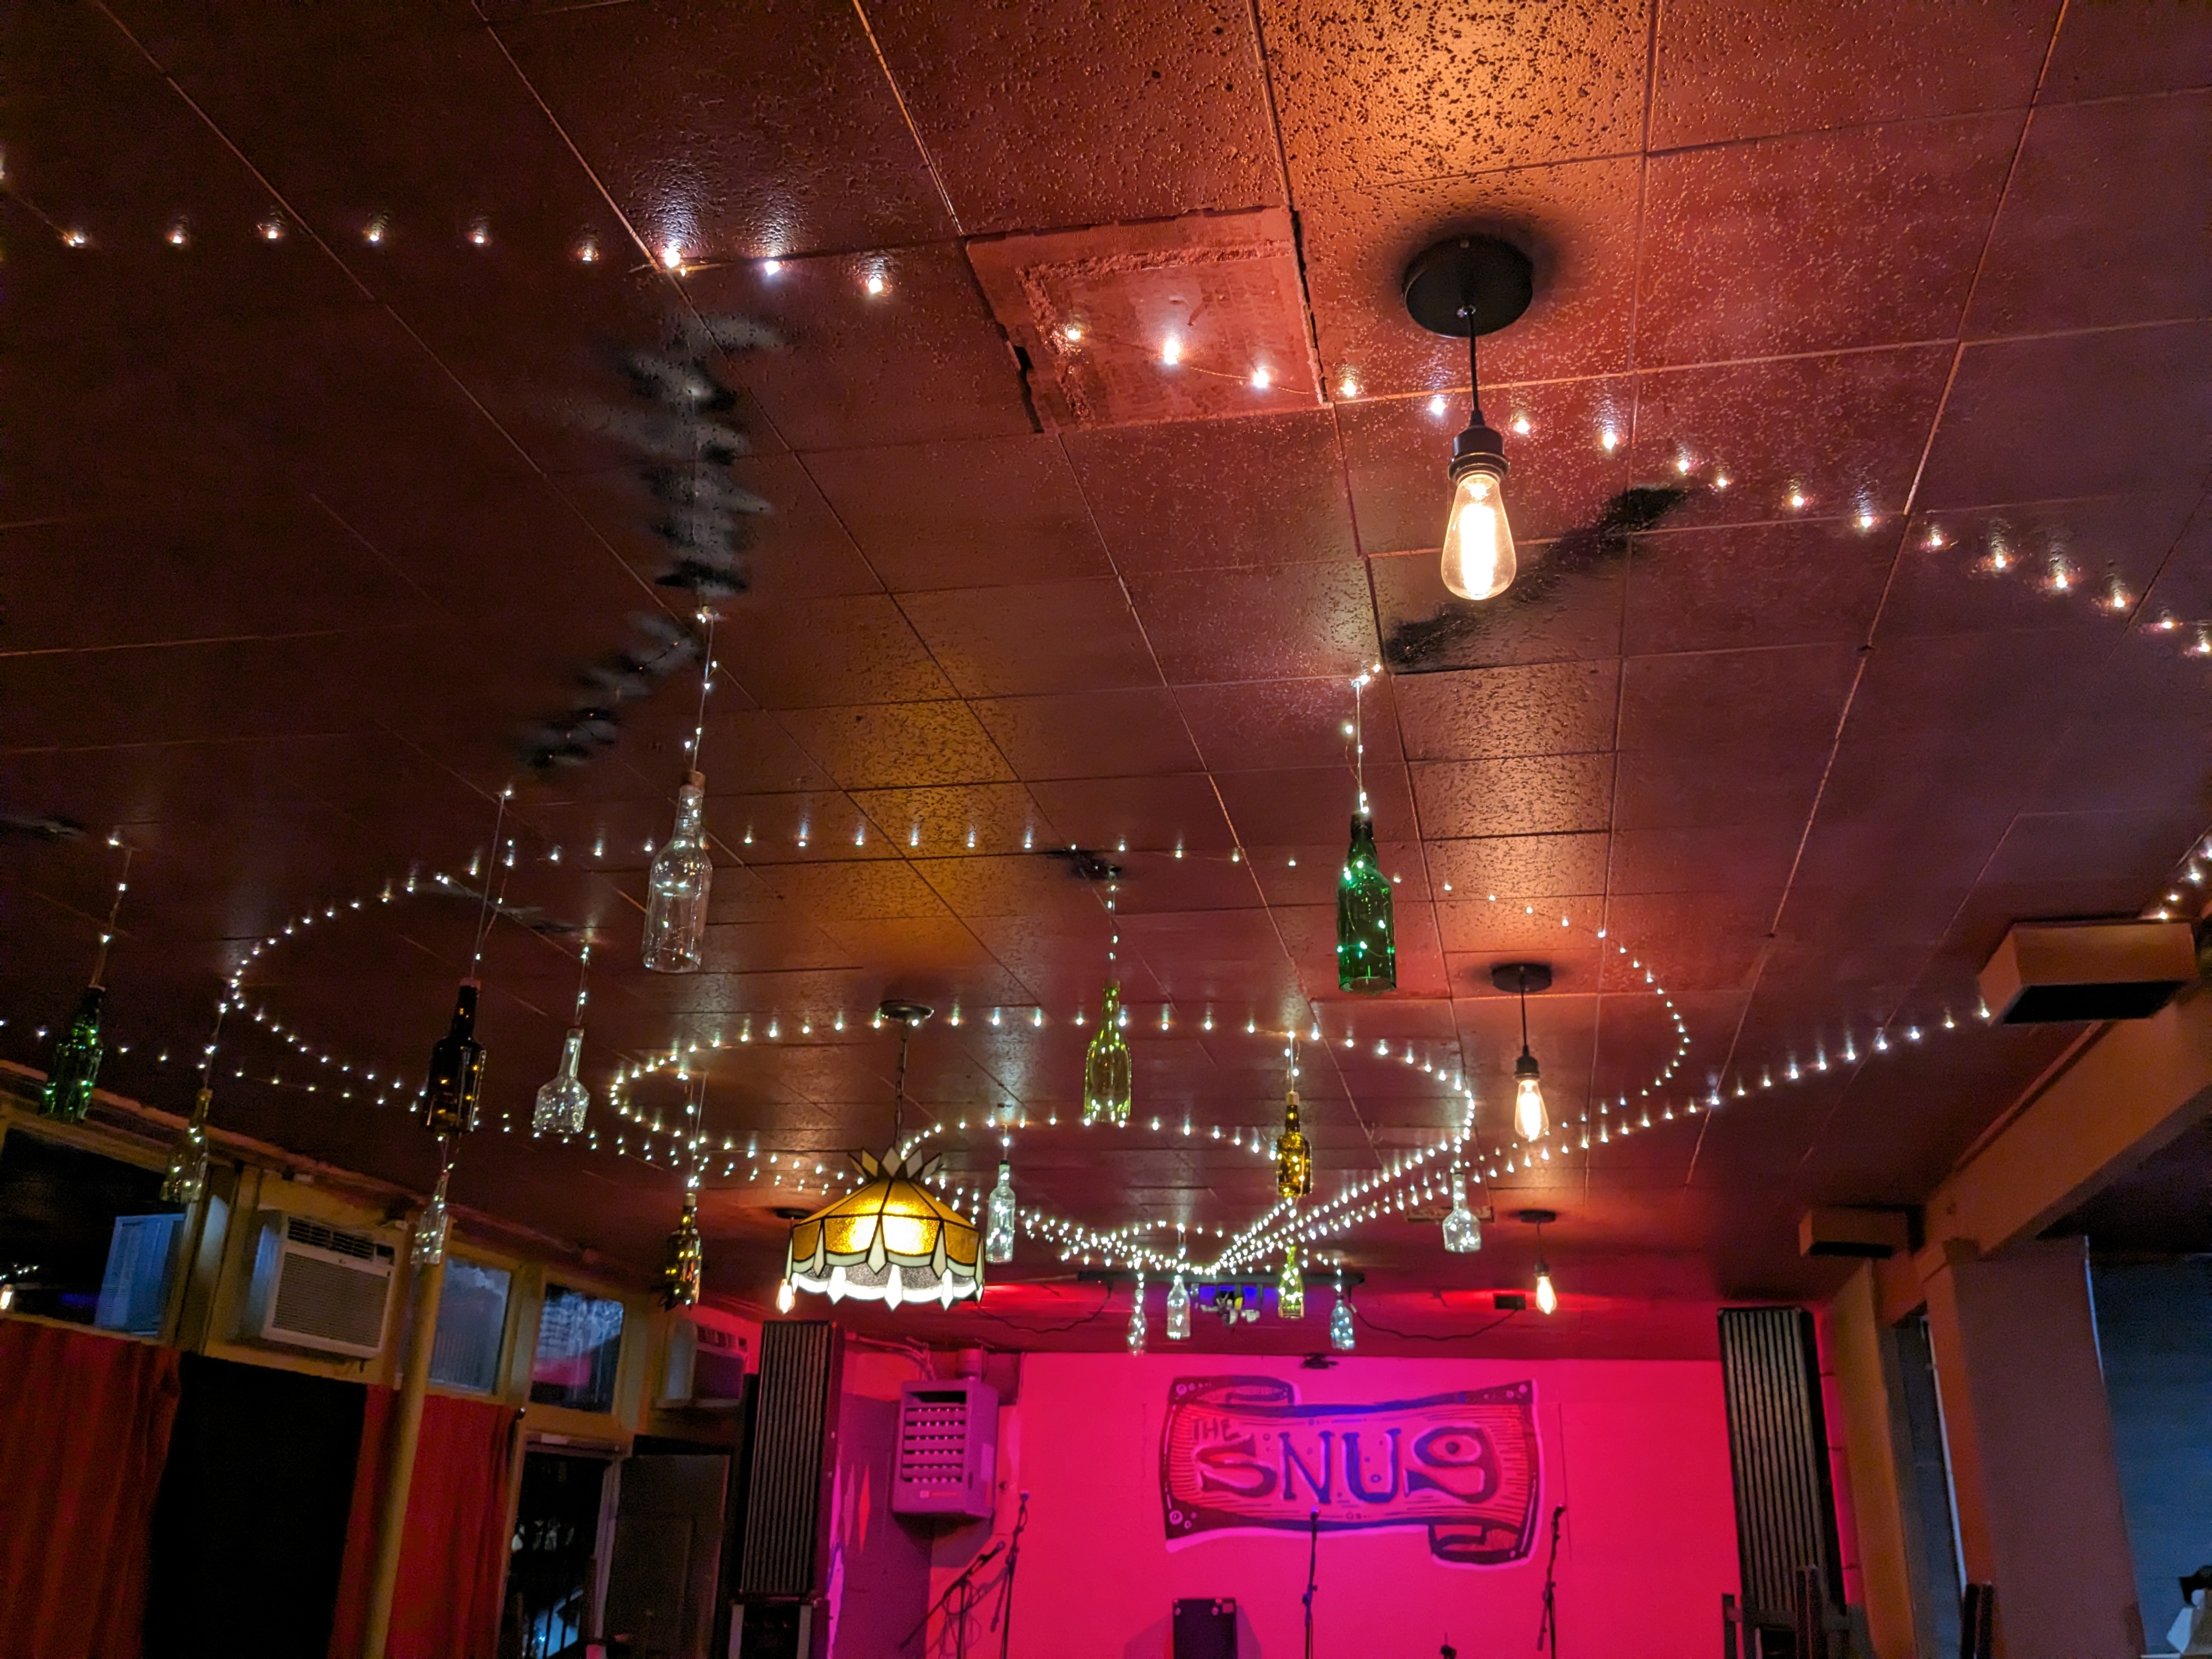 Snug ceiling and stage